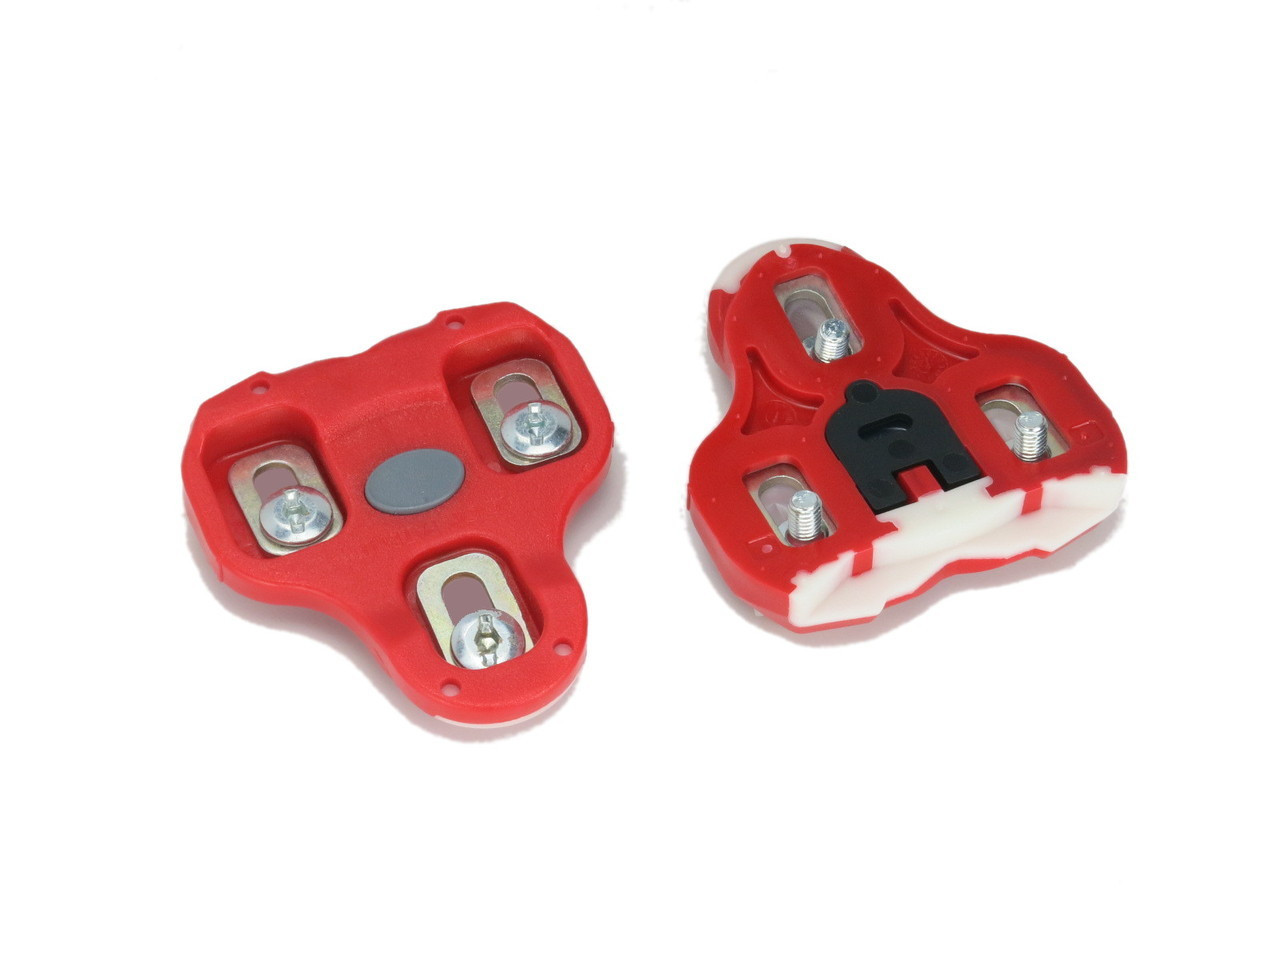 Look Keo Cleats Red 9 Degree - - Free day shipping on over $50